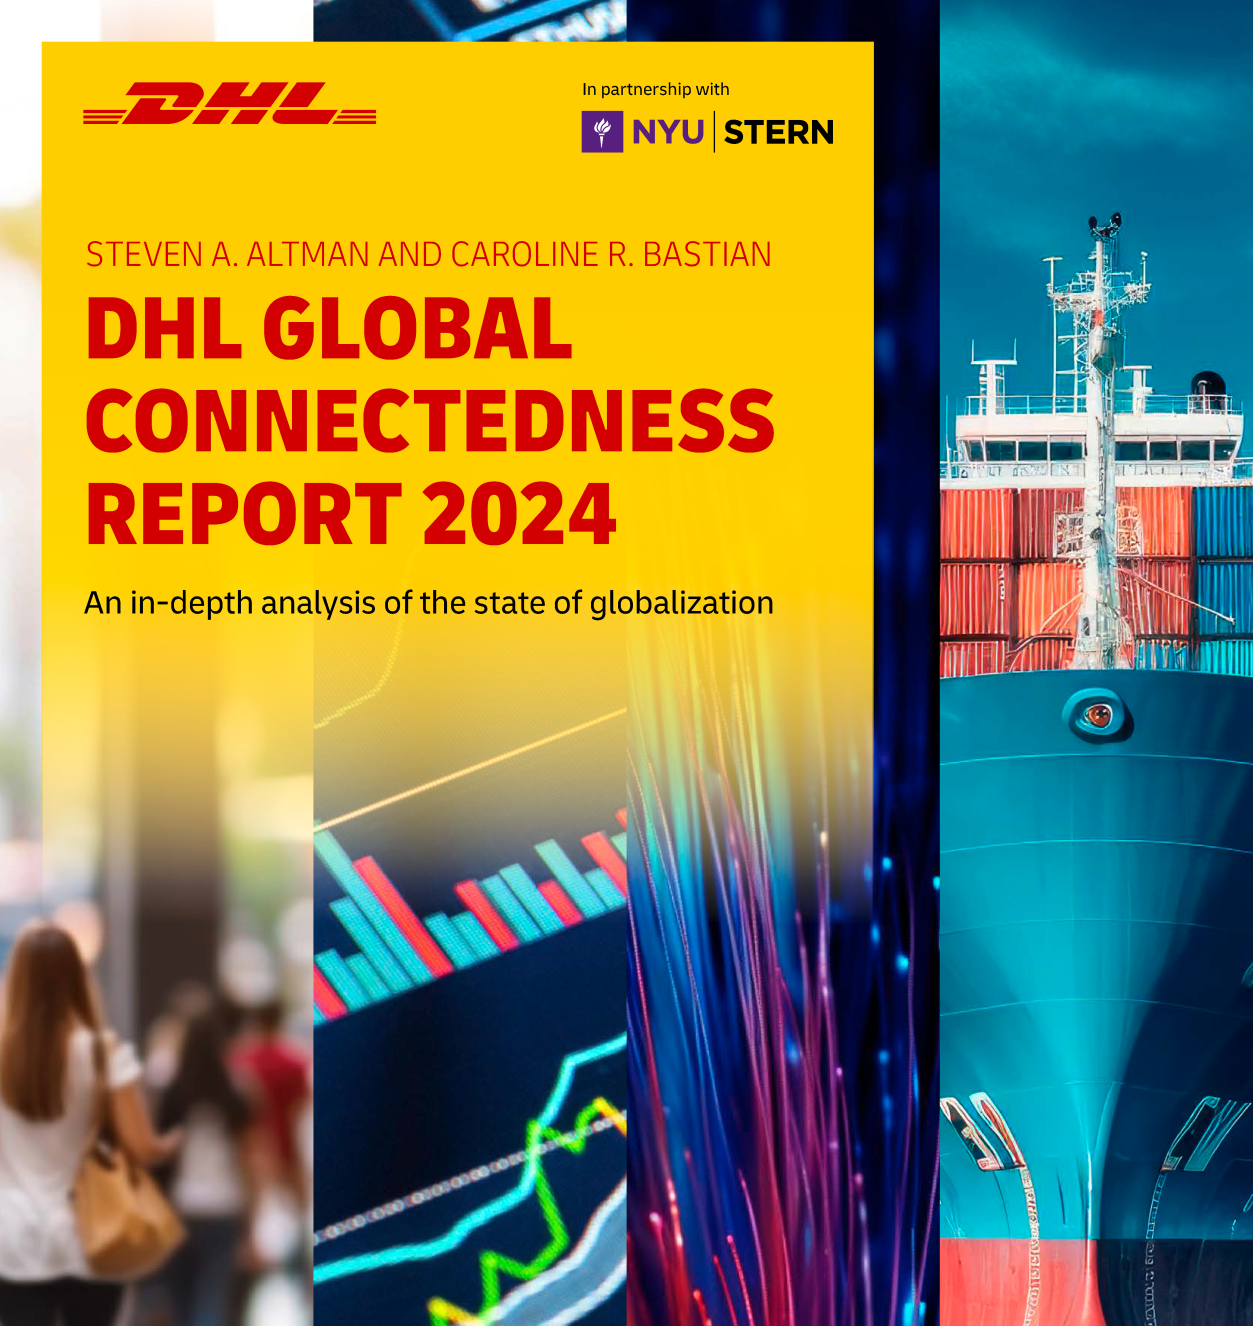 The cover of the DHL Global Connectedness Report 2024: An in-depth analysis of the state of globalization. The cover features four panels arranged horizontally: (1) a woman walking away from the viewer; (2) a set of digital financial graphics; (3) a colorful fiber optic cable; (4) a large container ship approaching the viewer